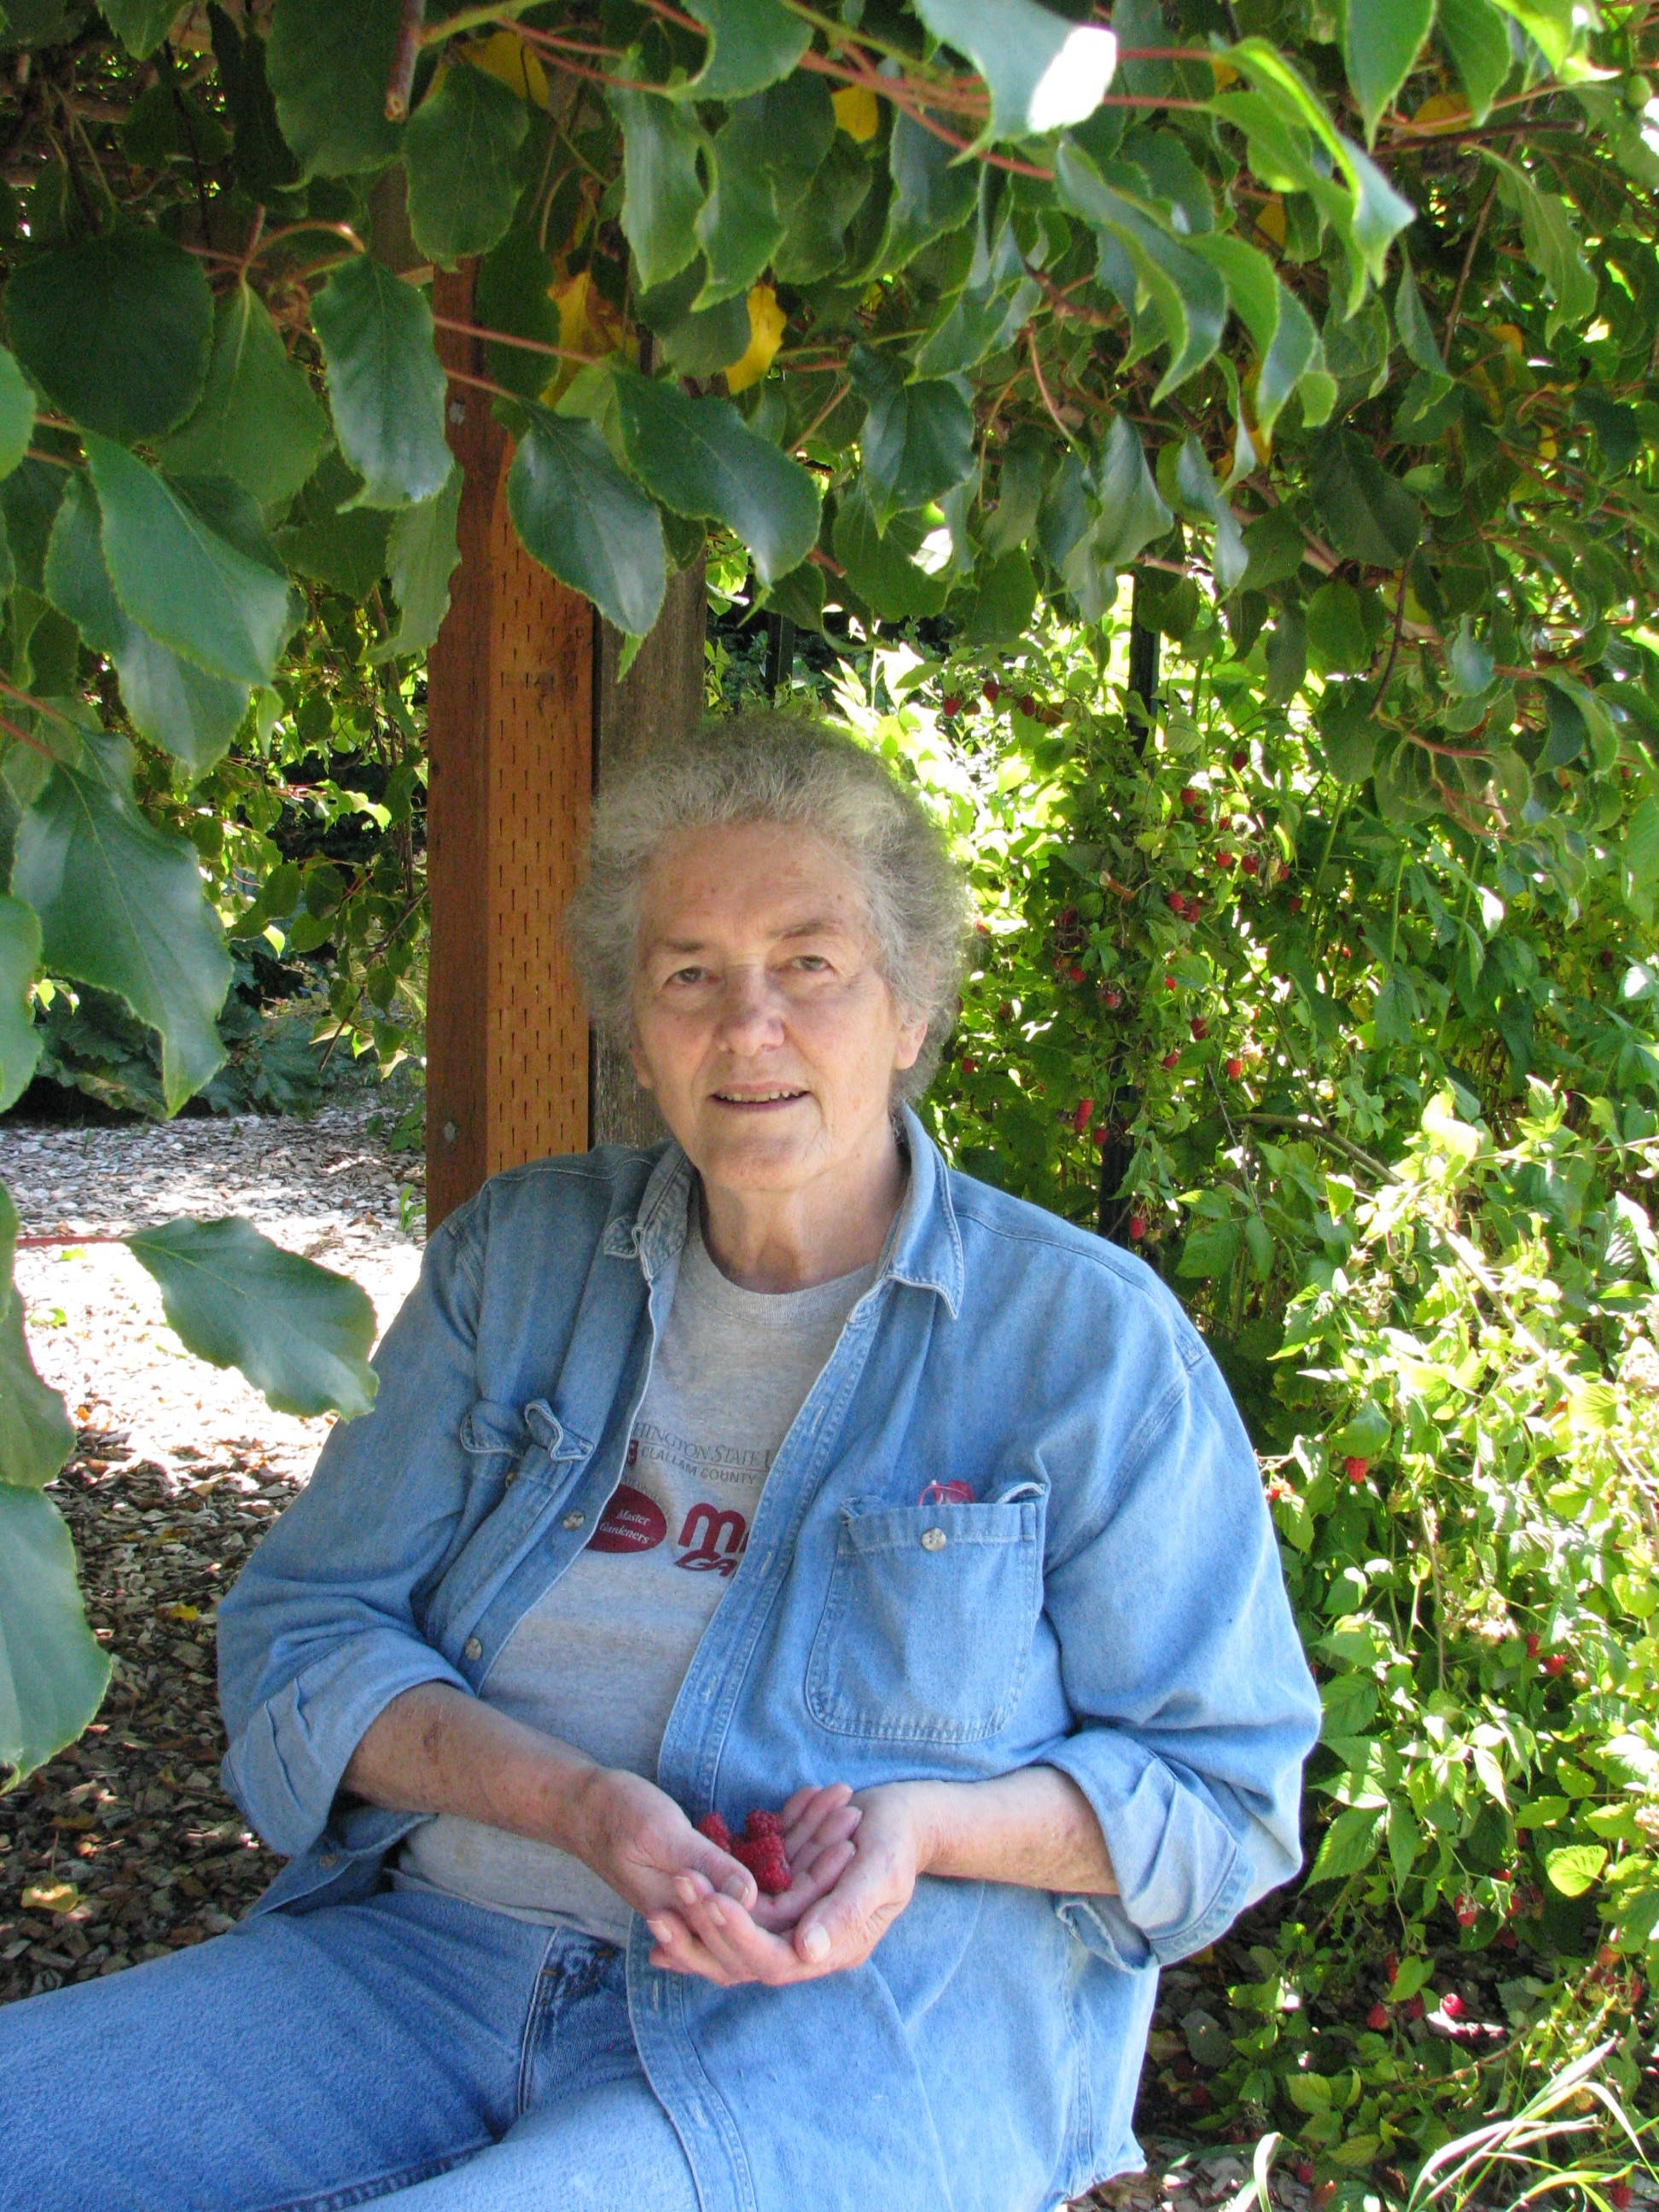 Veteran Master Gardener Muriel Nesbitt will present “Permaculture Garden Principles” at noon, Thursday, Aug. 8, in the county commissioners meeting room of the Clallam County Courthouse, 223 E. Fourth Street, Port Angeles. The presentation is part of the Green Thumb Brown Garden Tips educational series sponsored by the WSU Clallam County Master Gardeners on the second and fourth Thursday of each month. Photo by Amanda Rosenberg